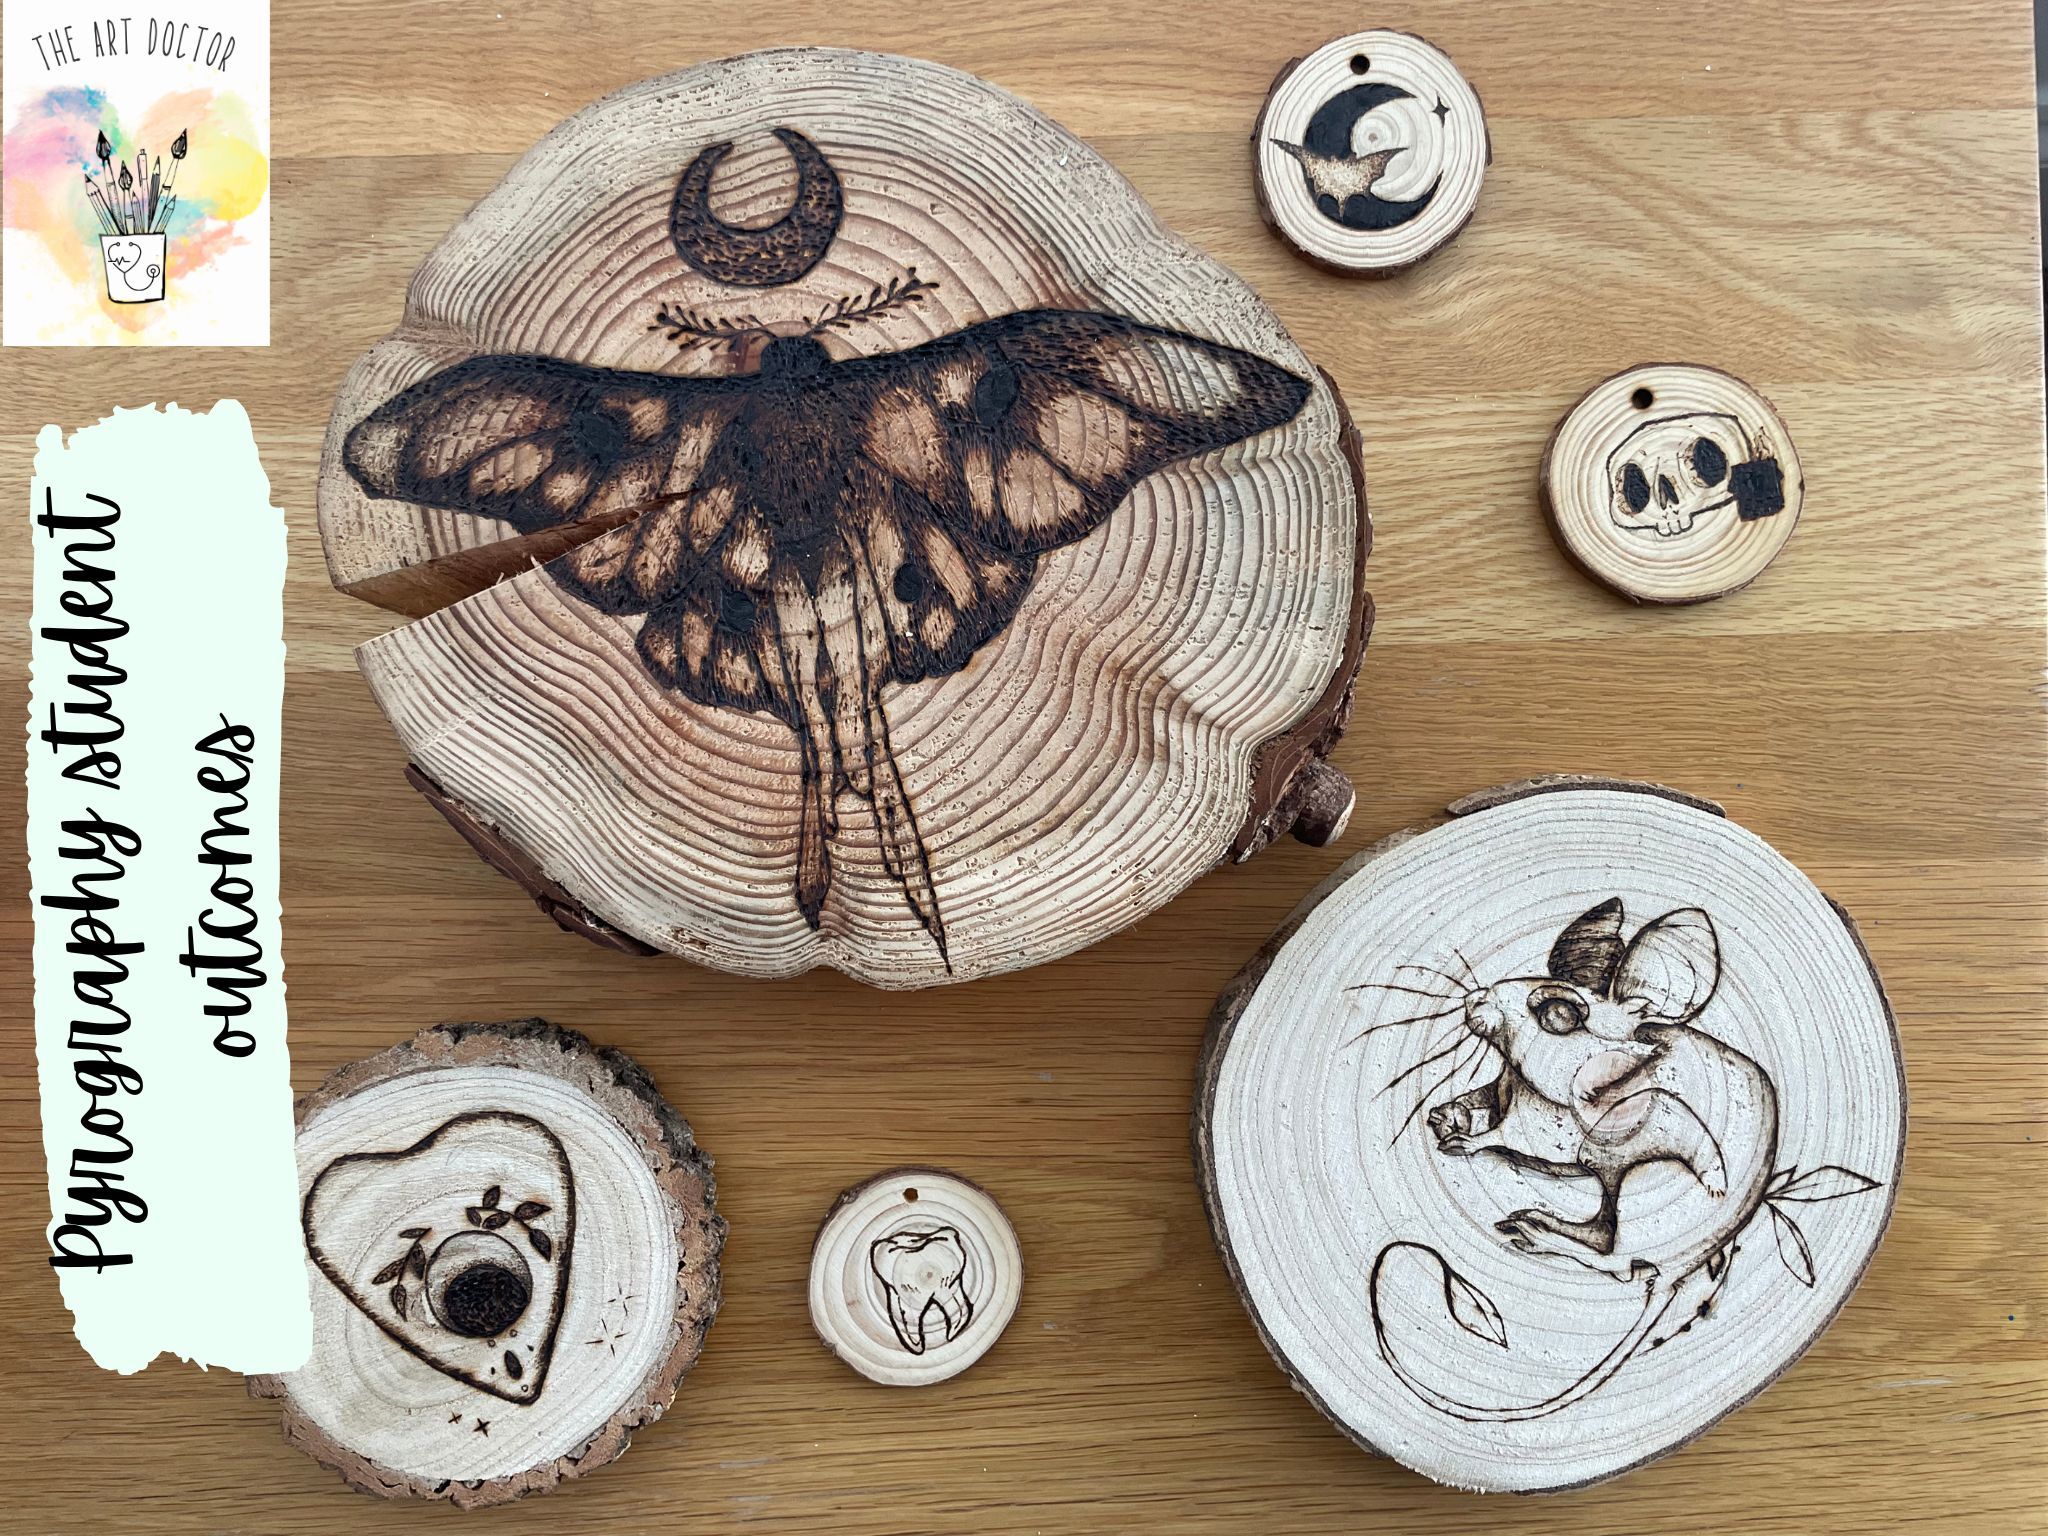 Creative Wood Burning Crafts for Inspiration